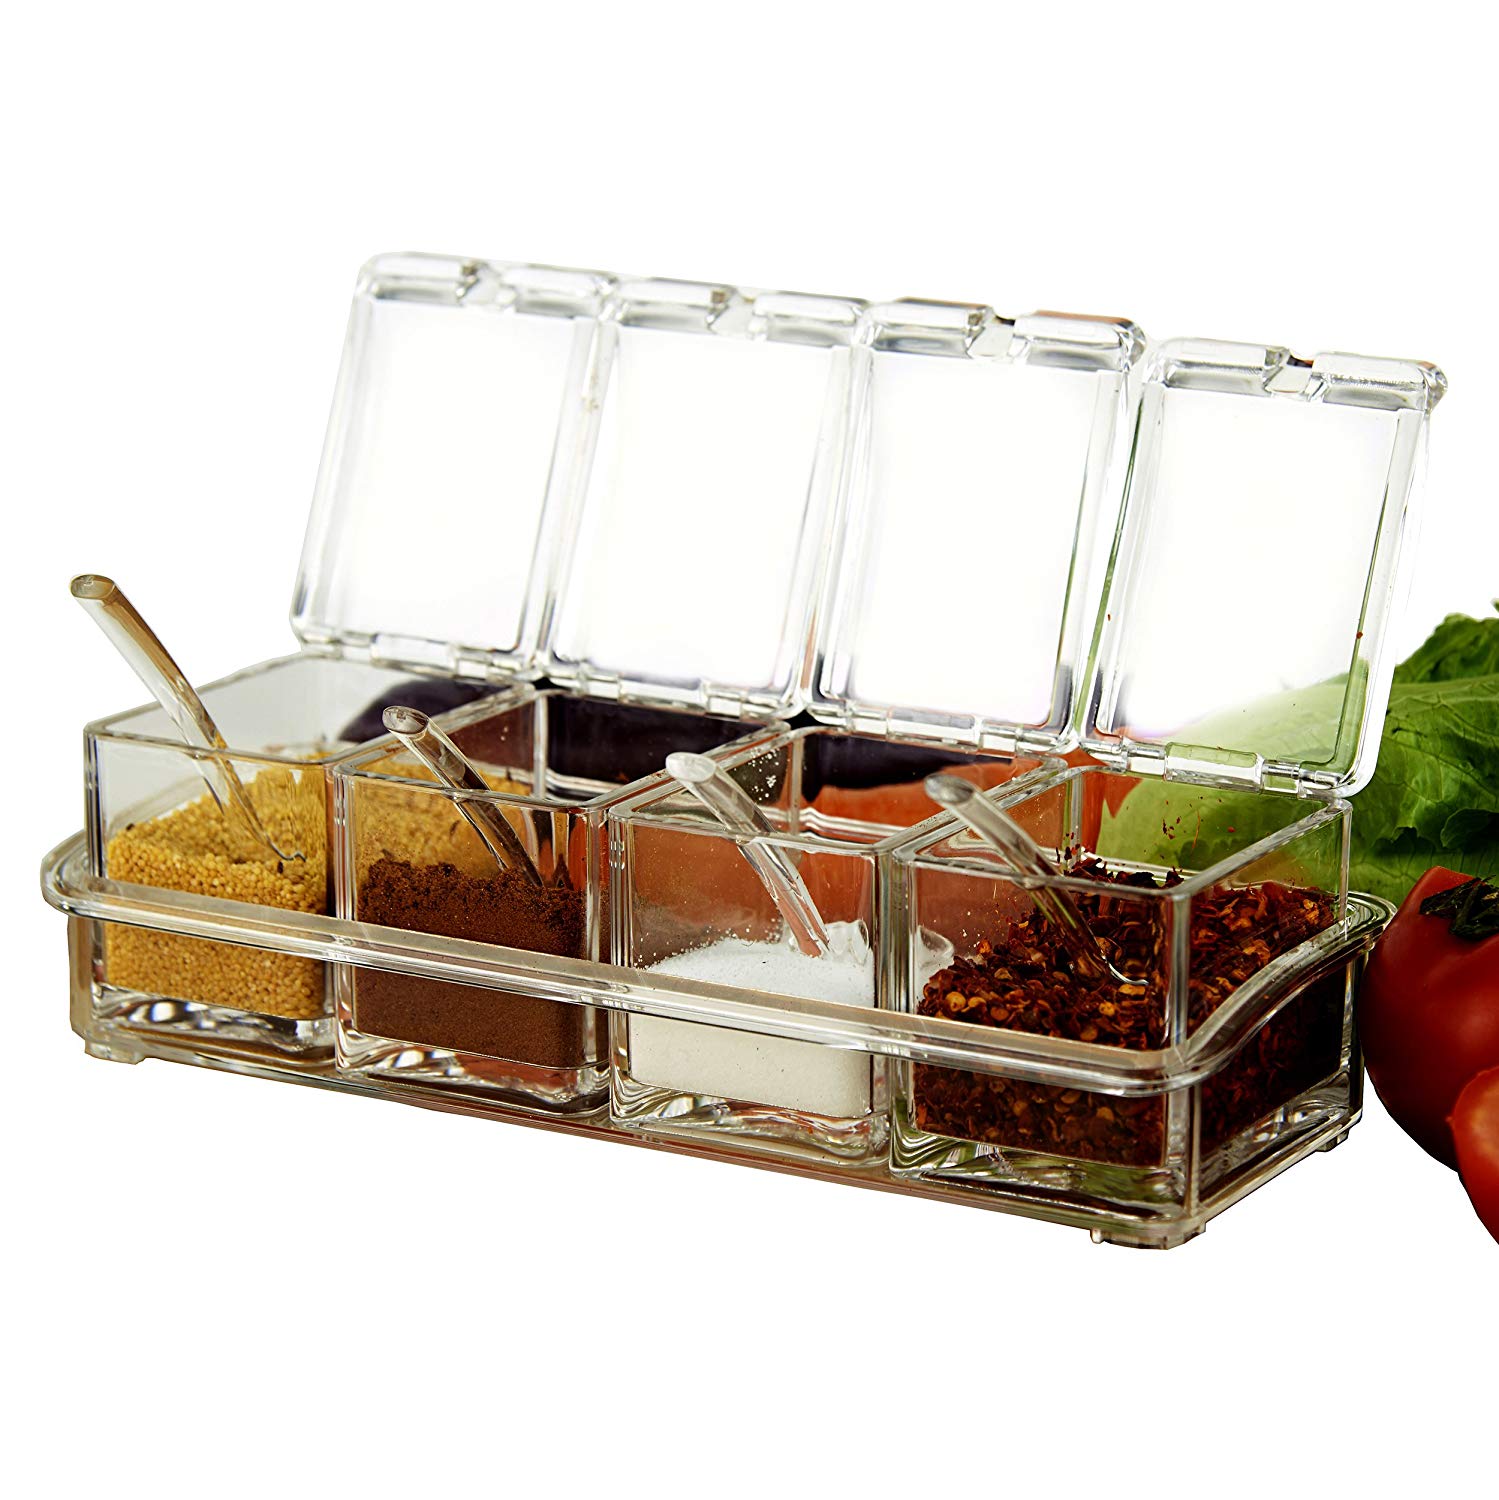 SHSYCER Acrylic Seasoning Box Seasoning Storage Clear Spice Rack Organizer Condiment Holder Container Spices,with Plastic Spoons Set of 4